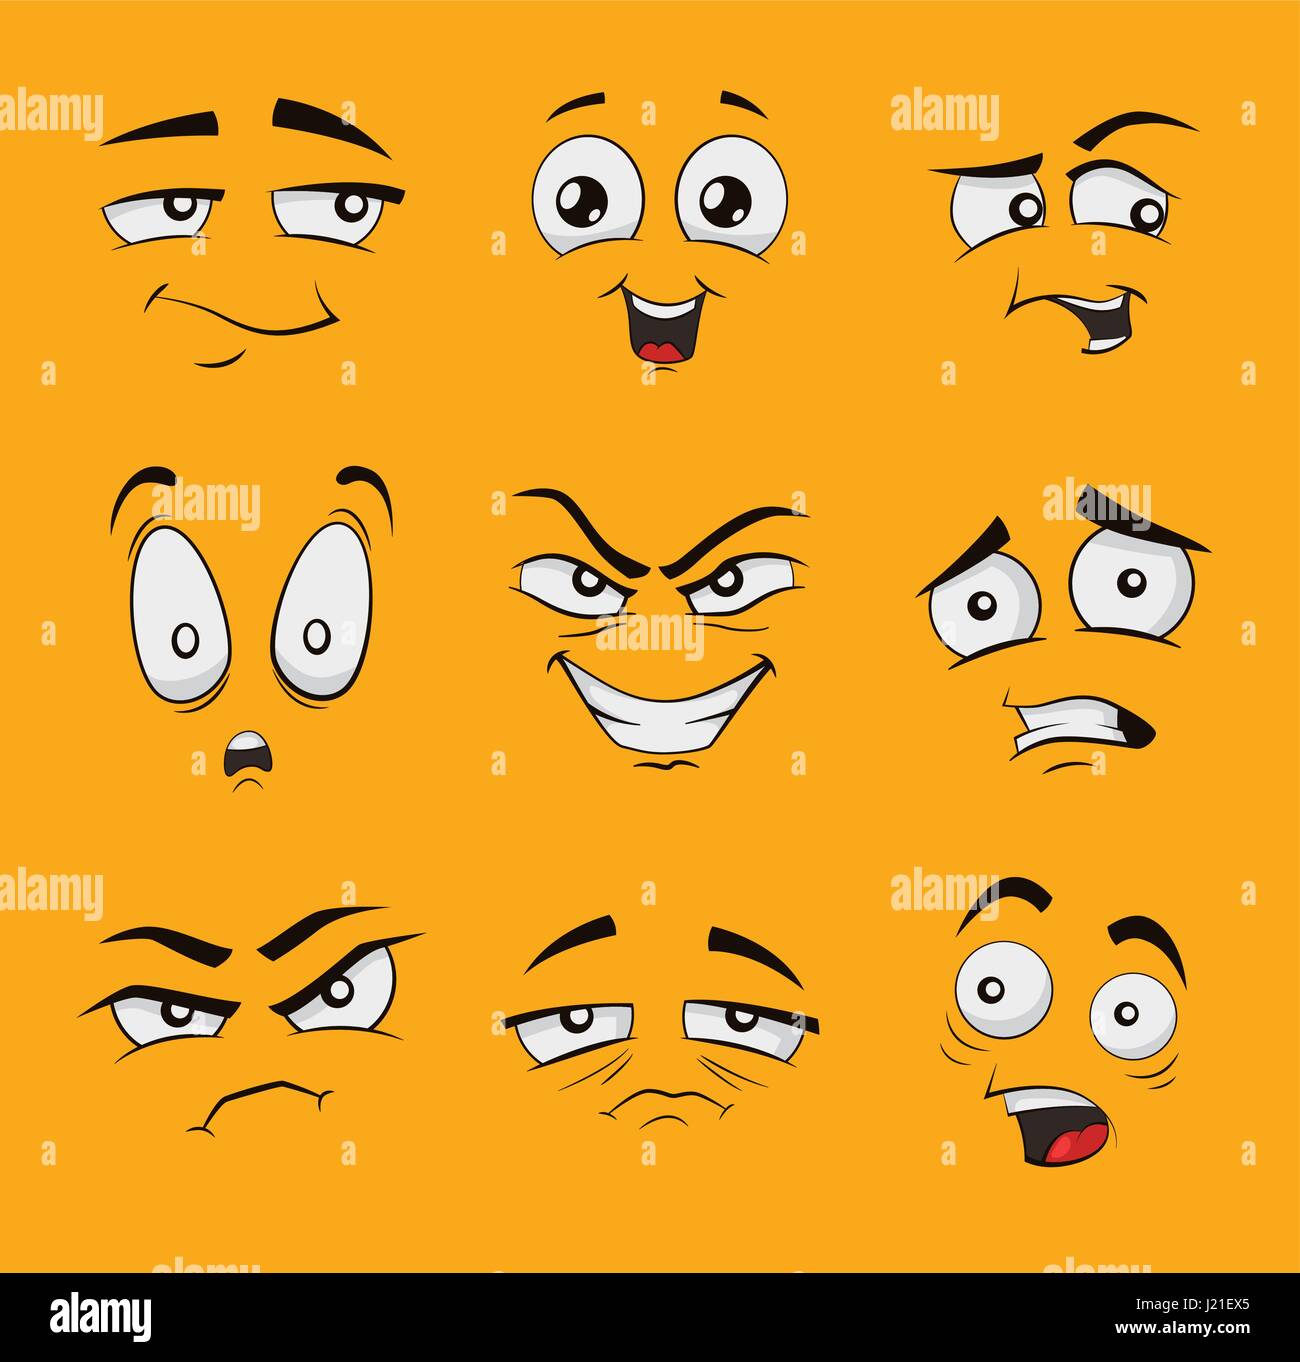 Funny cartoon faces with emotions. Stock Vector